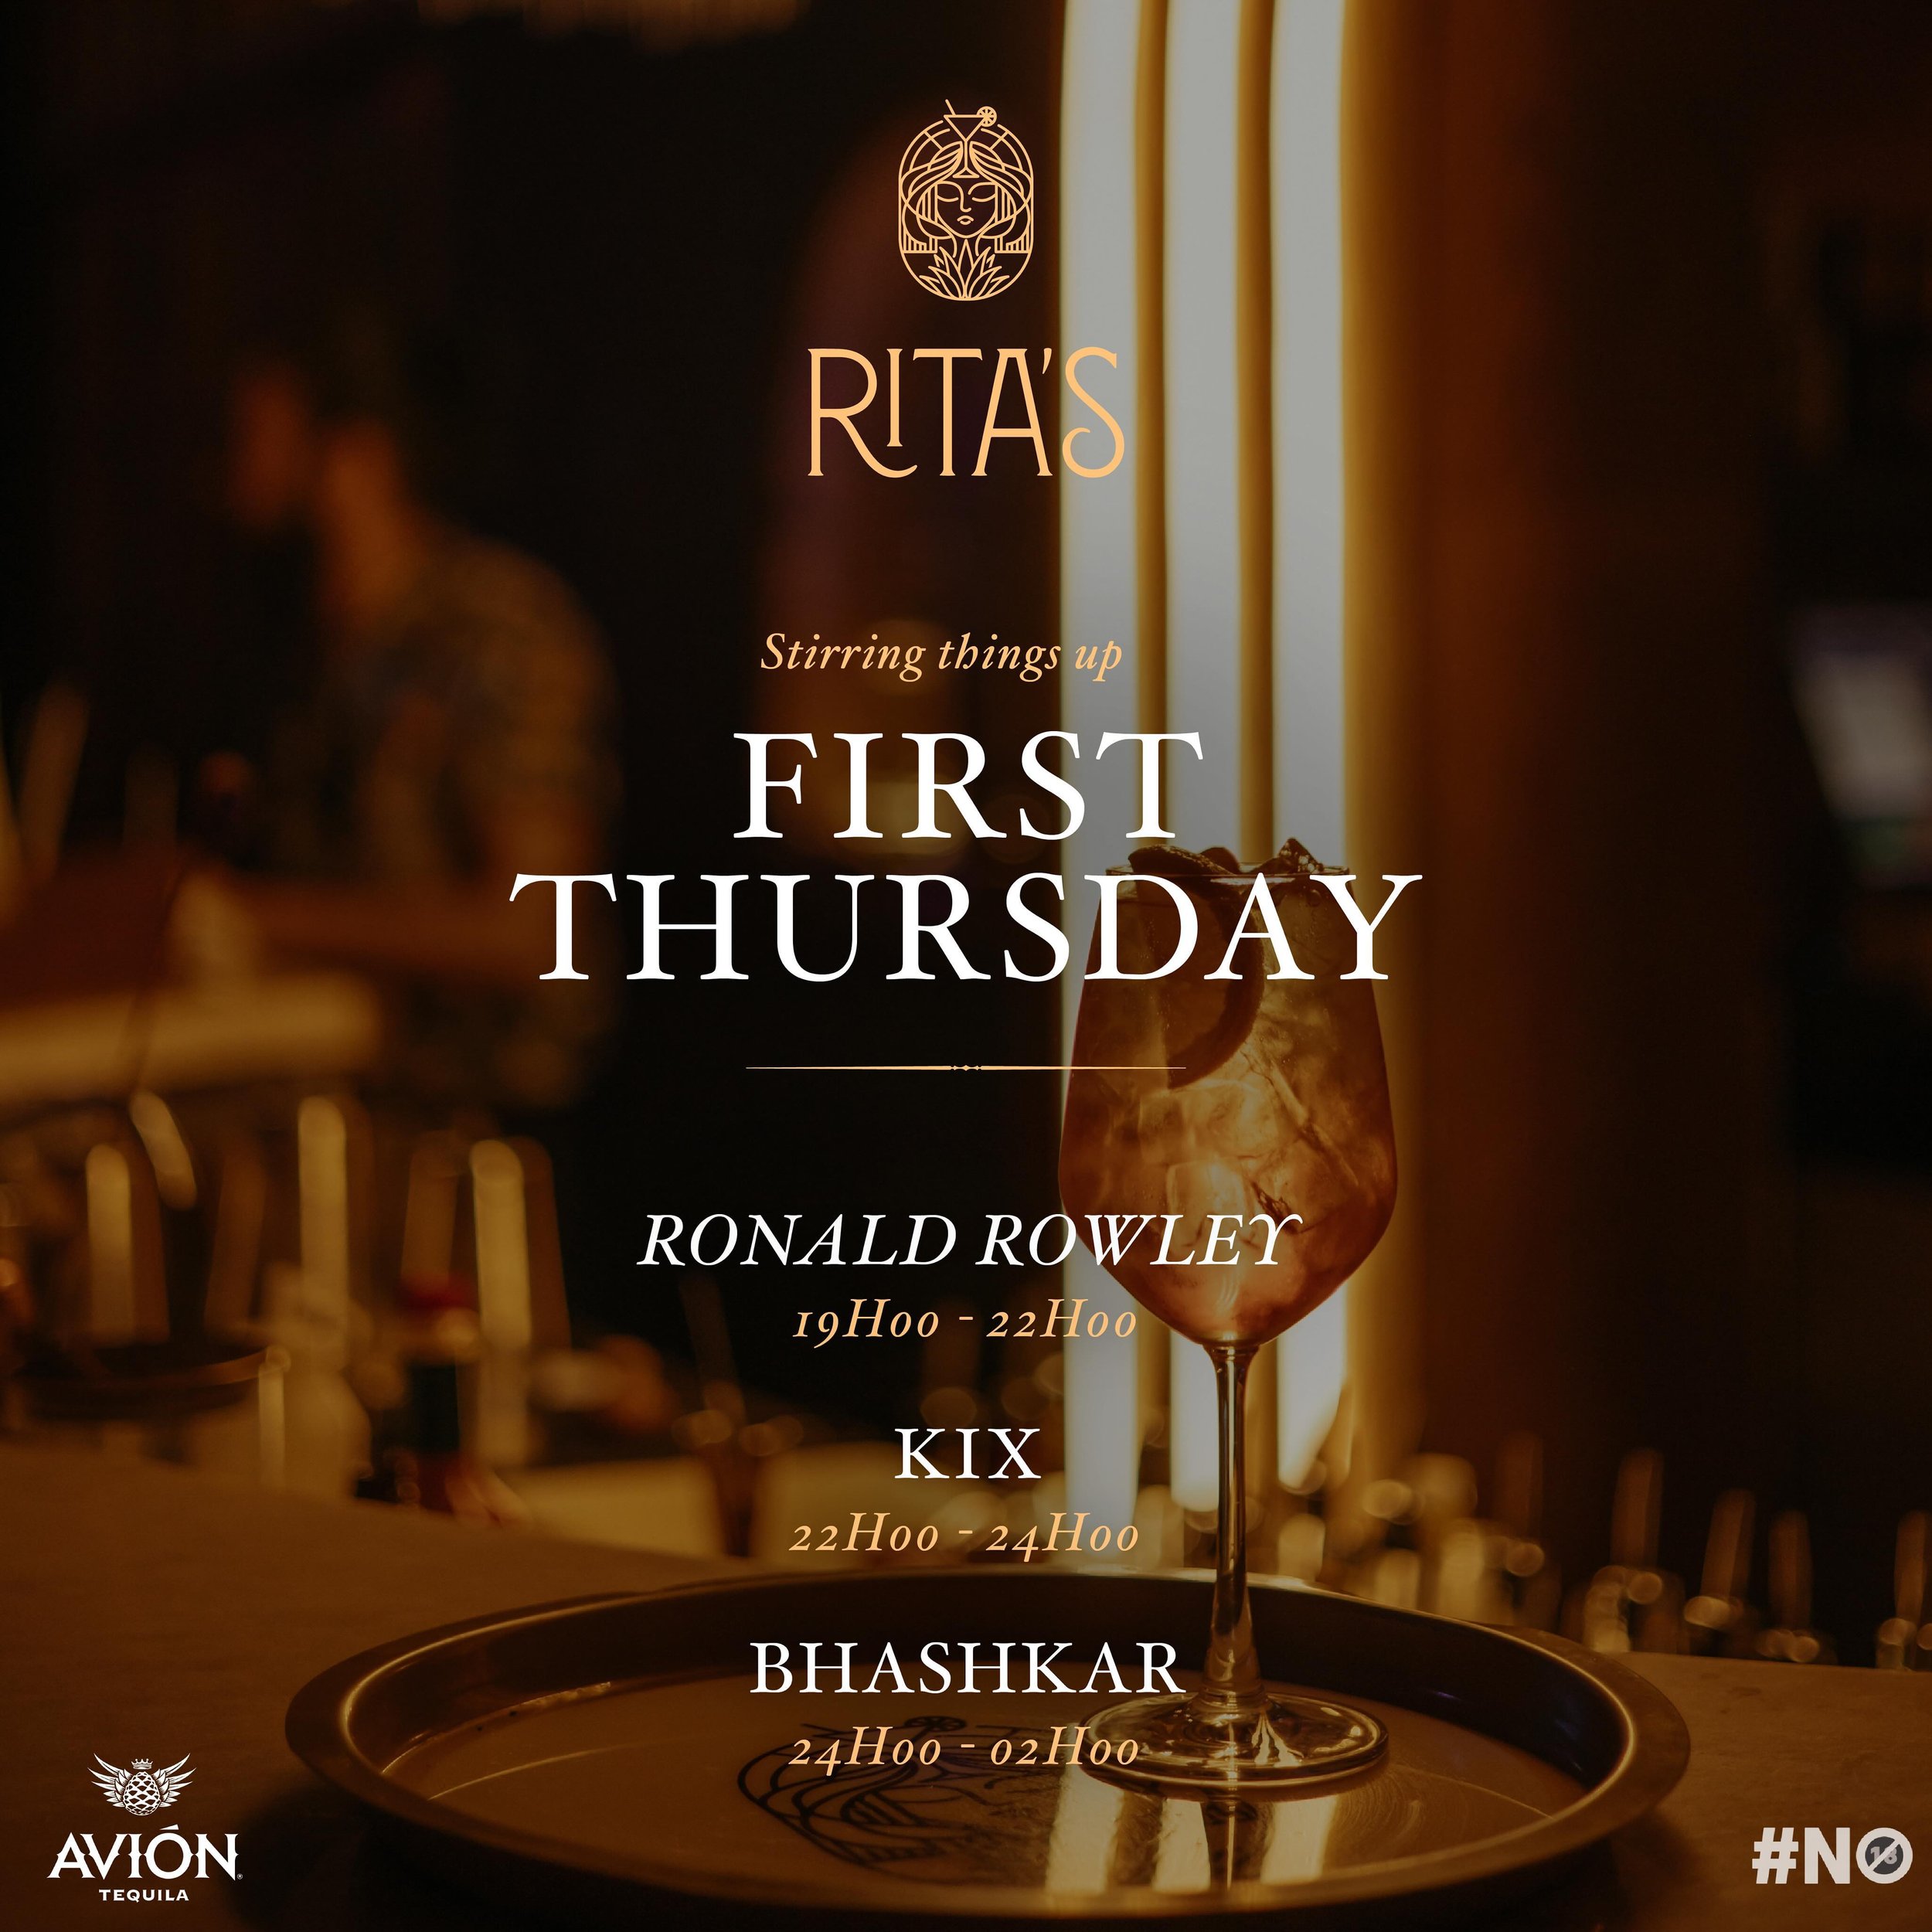 ✨FIRST THURSDAY LINE UP✨ Get ready to stir things up this #firstthursday as we celebrate the start of May with a hot DJ line up🪩🍸

Featuring: 
@ronscones2_ 
KIX
@djbhashkar 

Table bookings are essential. 
For table bookings please contact 021 300 